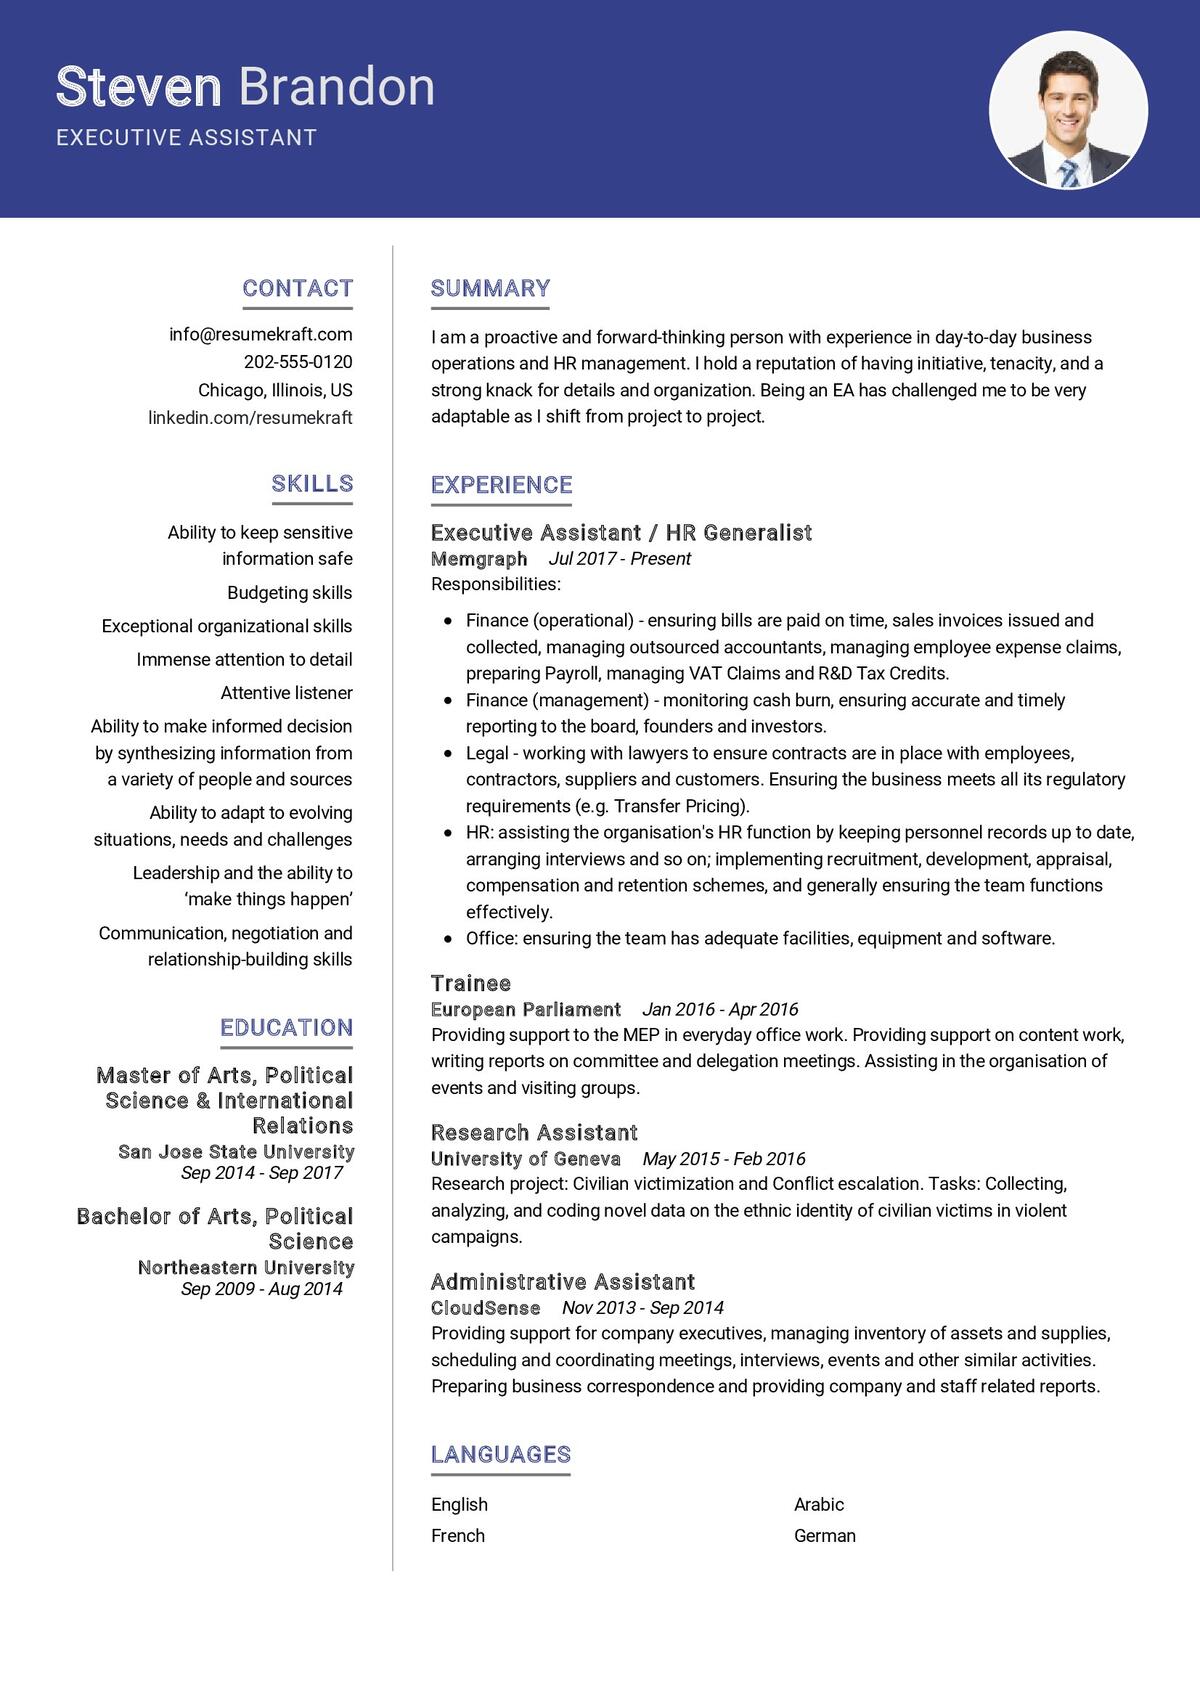 executive assistant summary for resume